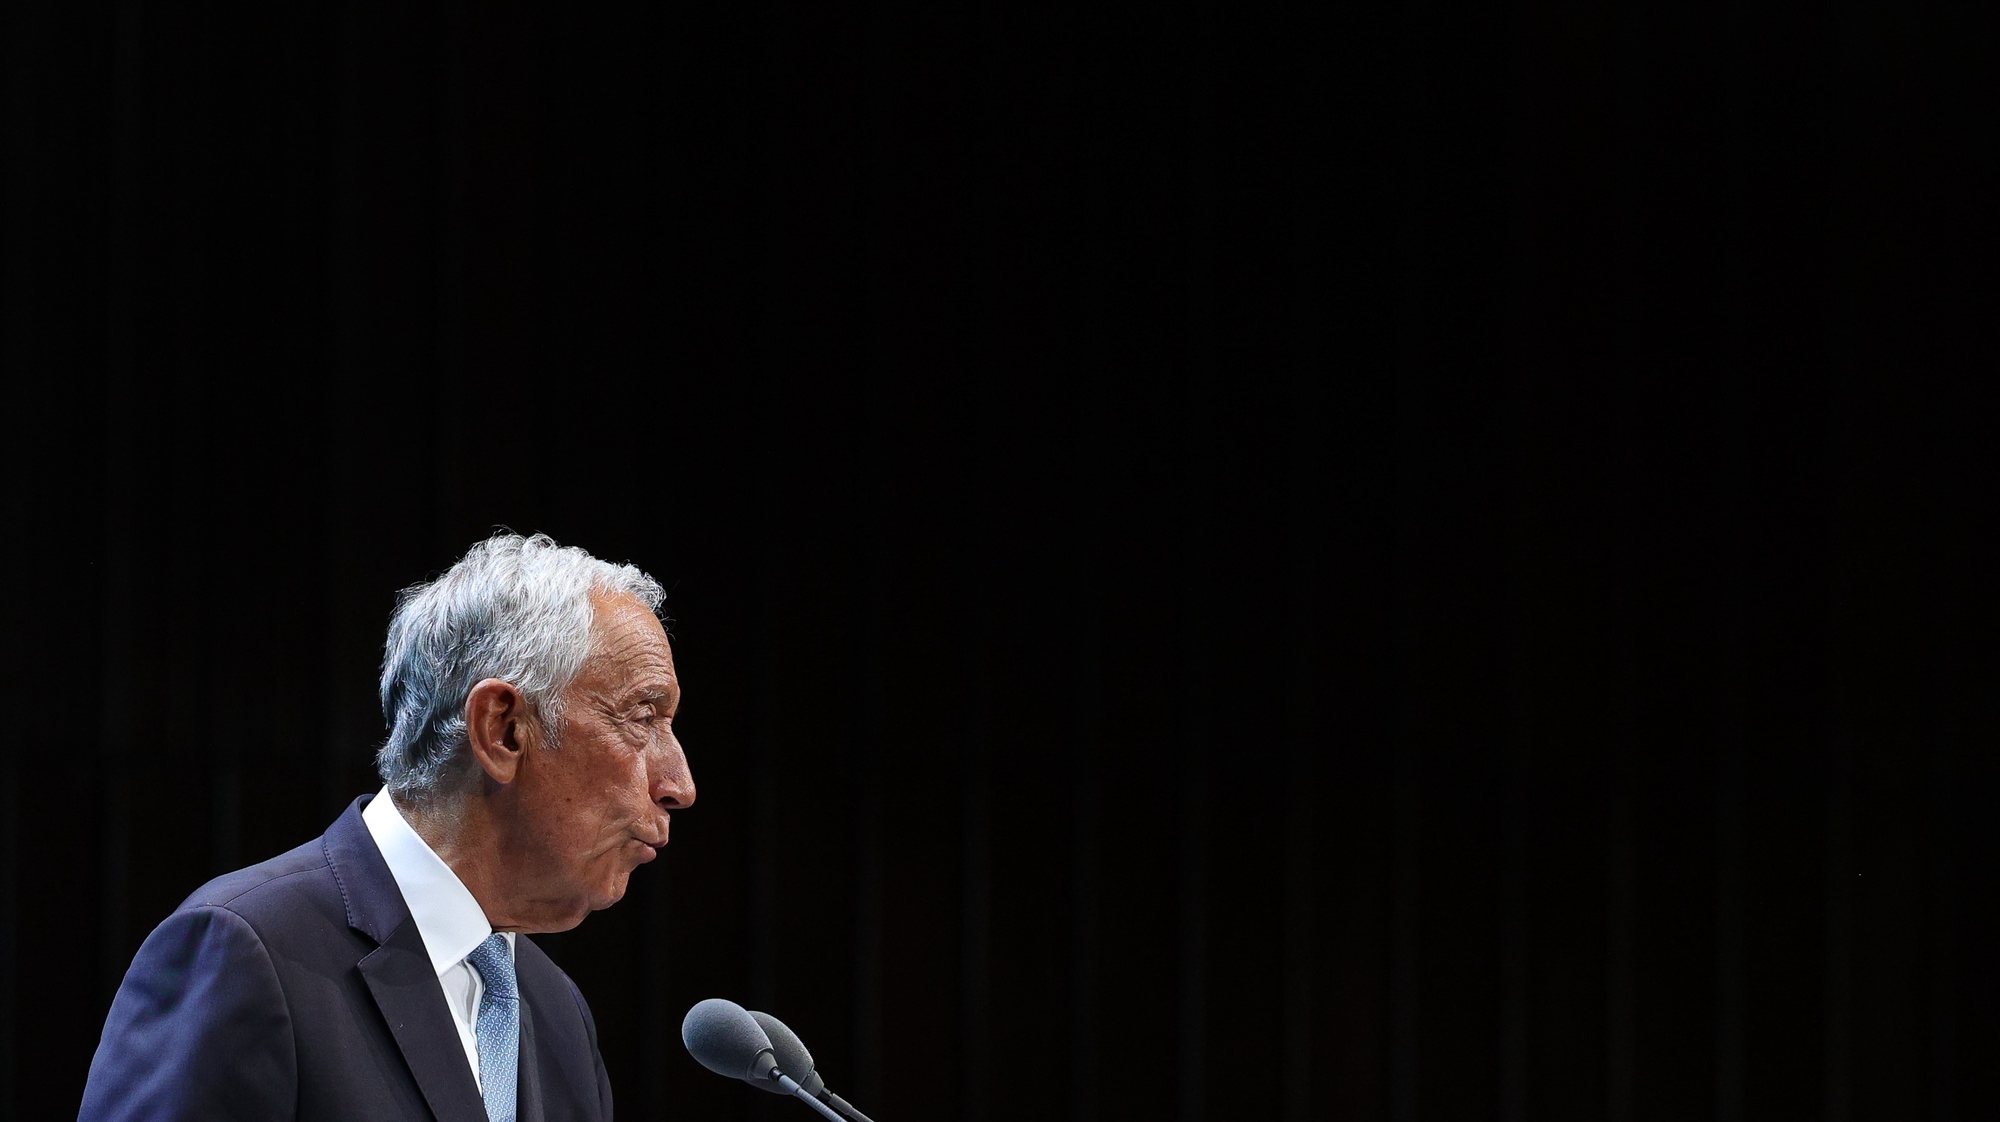 Portuguese President Marcelo Rebelo de Sousa delivers his speech during the cerimony of award of the Gulbenkian Prize for Humanity in Lisbon, Portugal, 19 July 2023. TIAGO PETINGA/LUSA